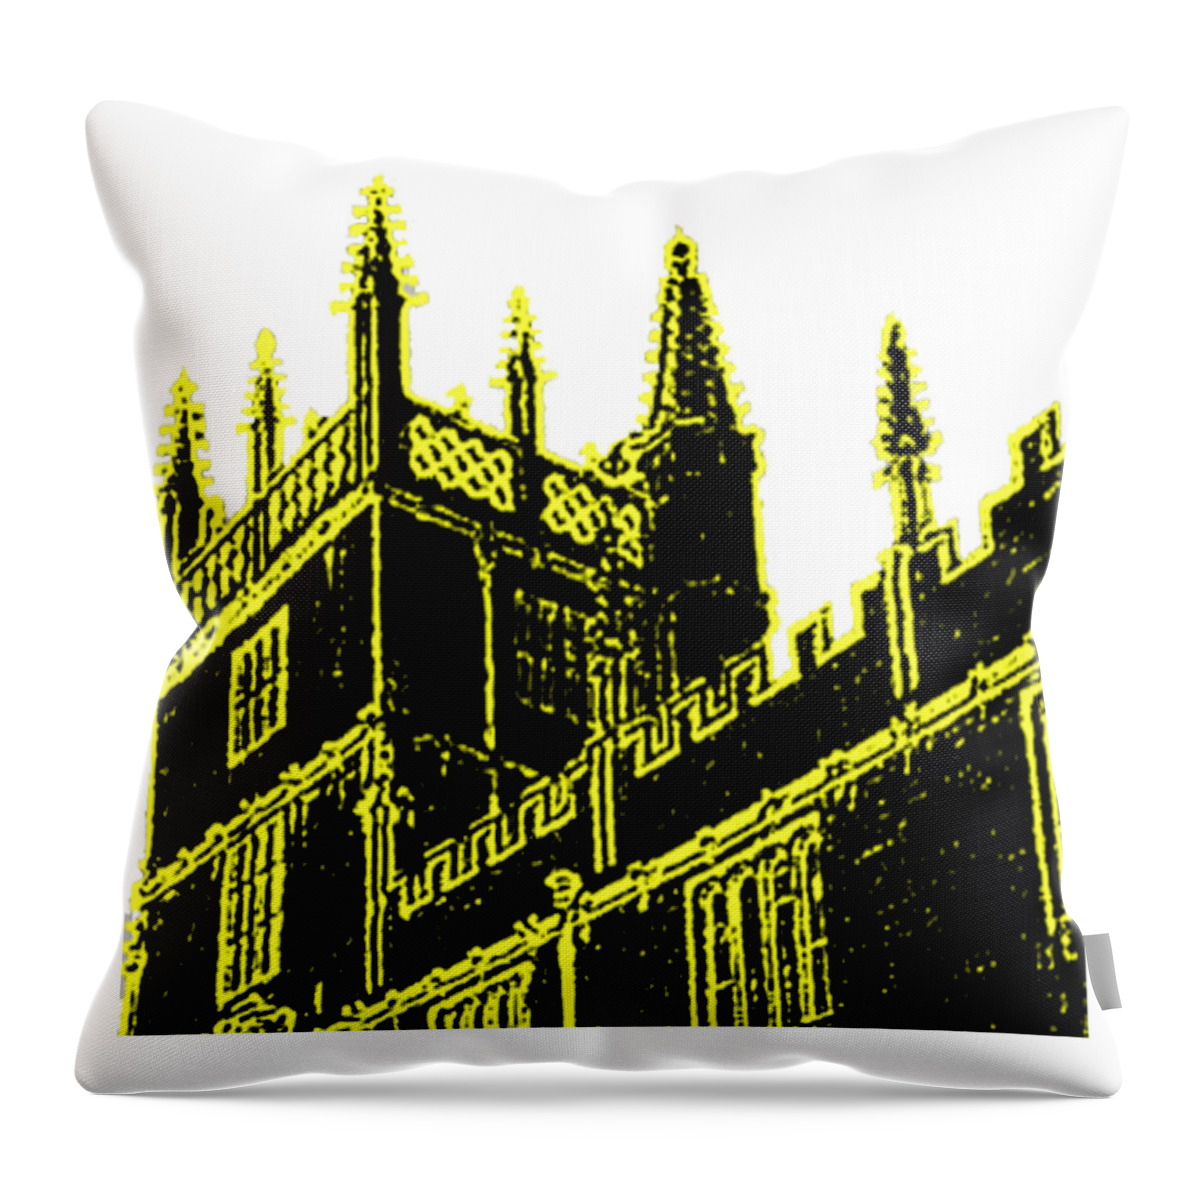 Oxford England 1986 Yellow Spirals Art1 Jgibney The Museum Gifts Throw Pillow featuring the digital art Oxford England 1986 Yellow Spirals Art1 jGibney The MUSEUM Gifts by The MUSEUM Artist Series jGibney